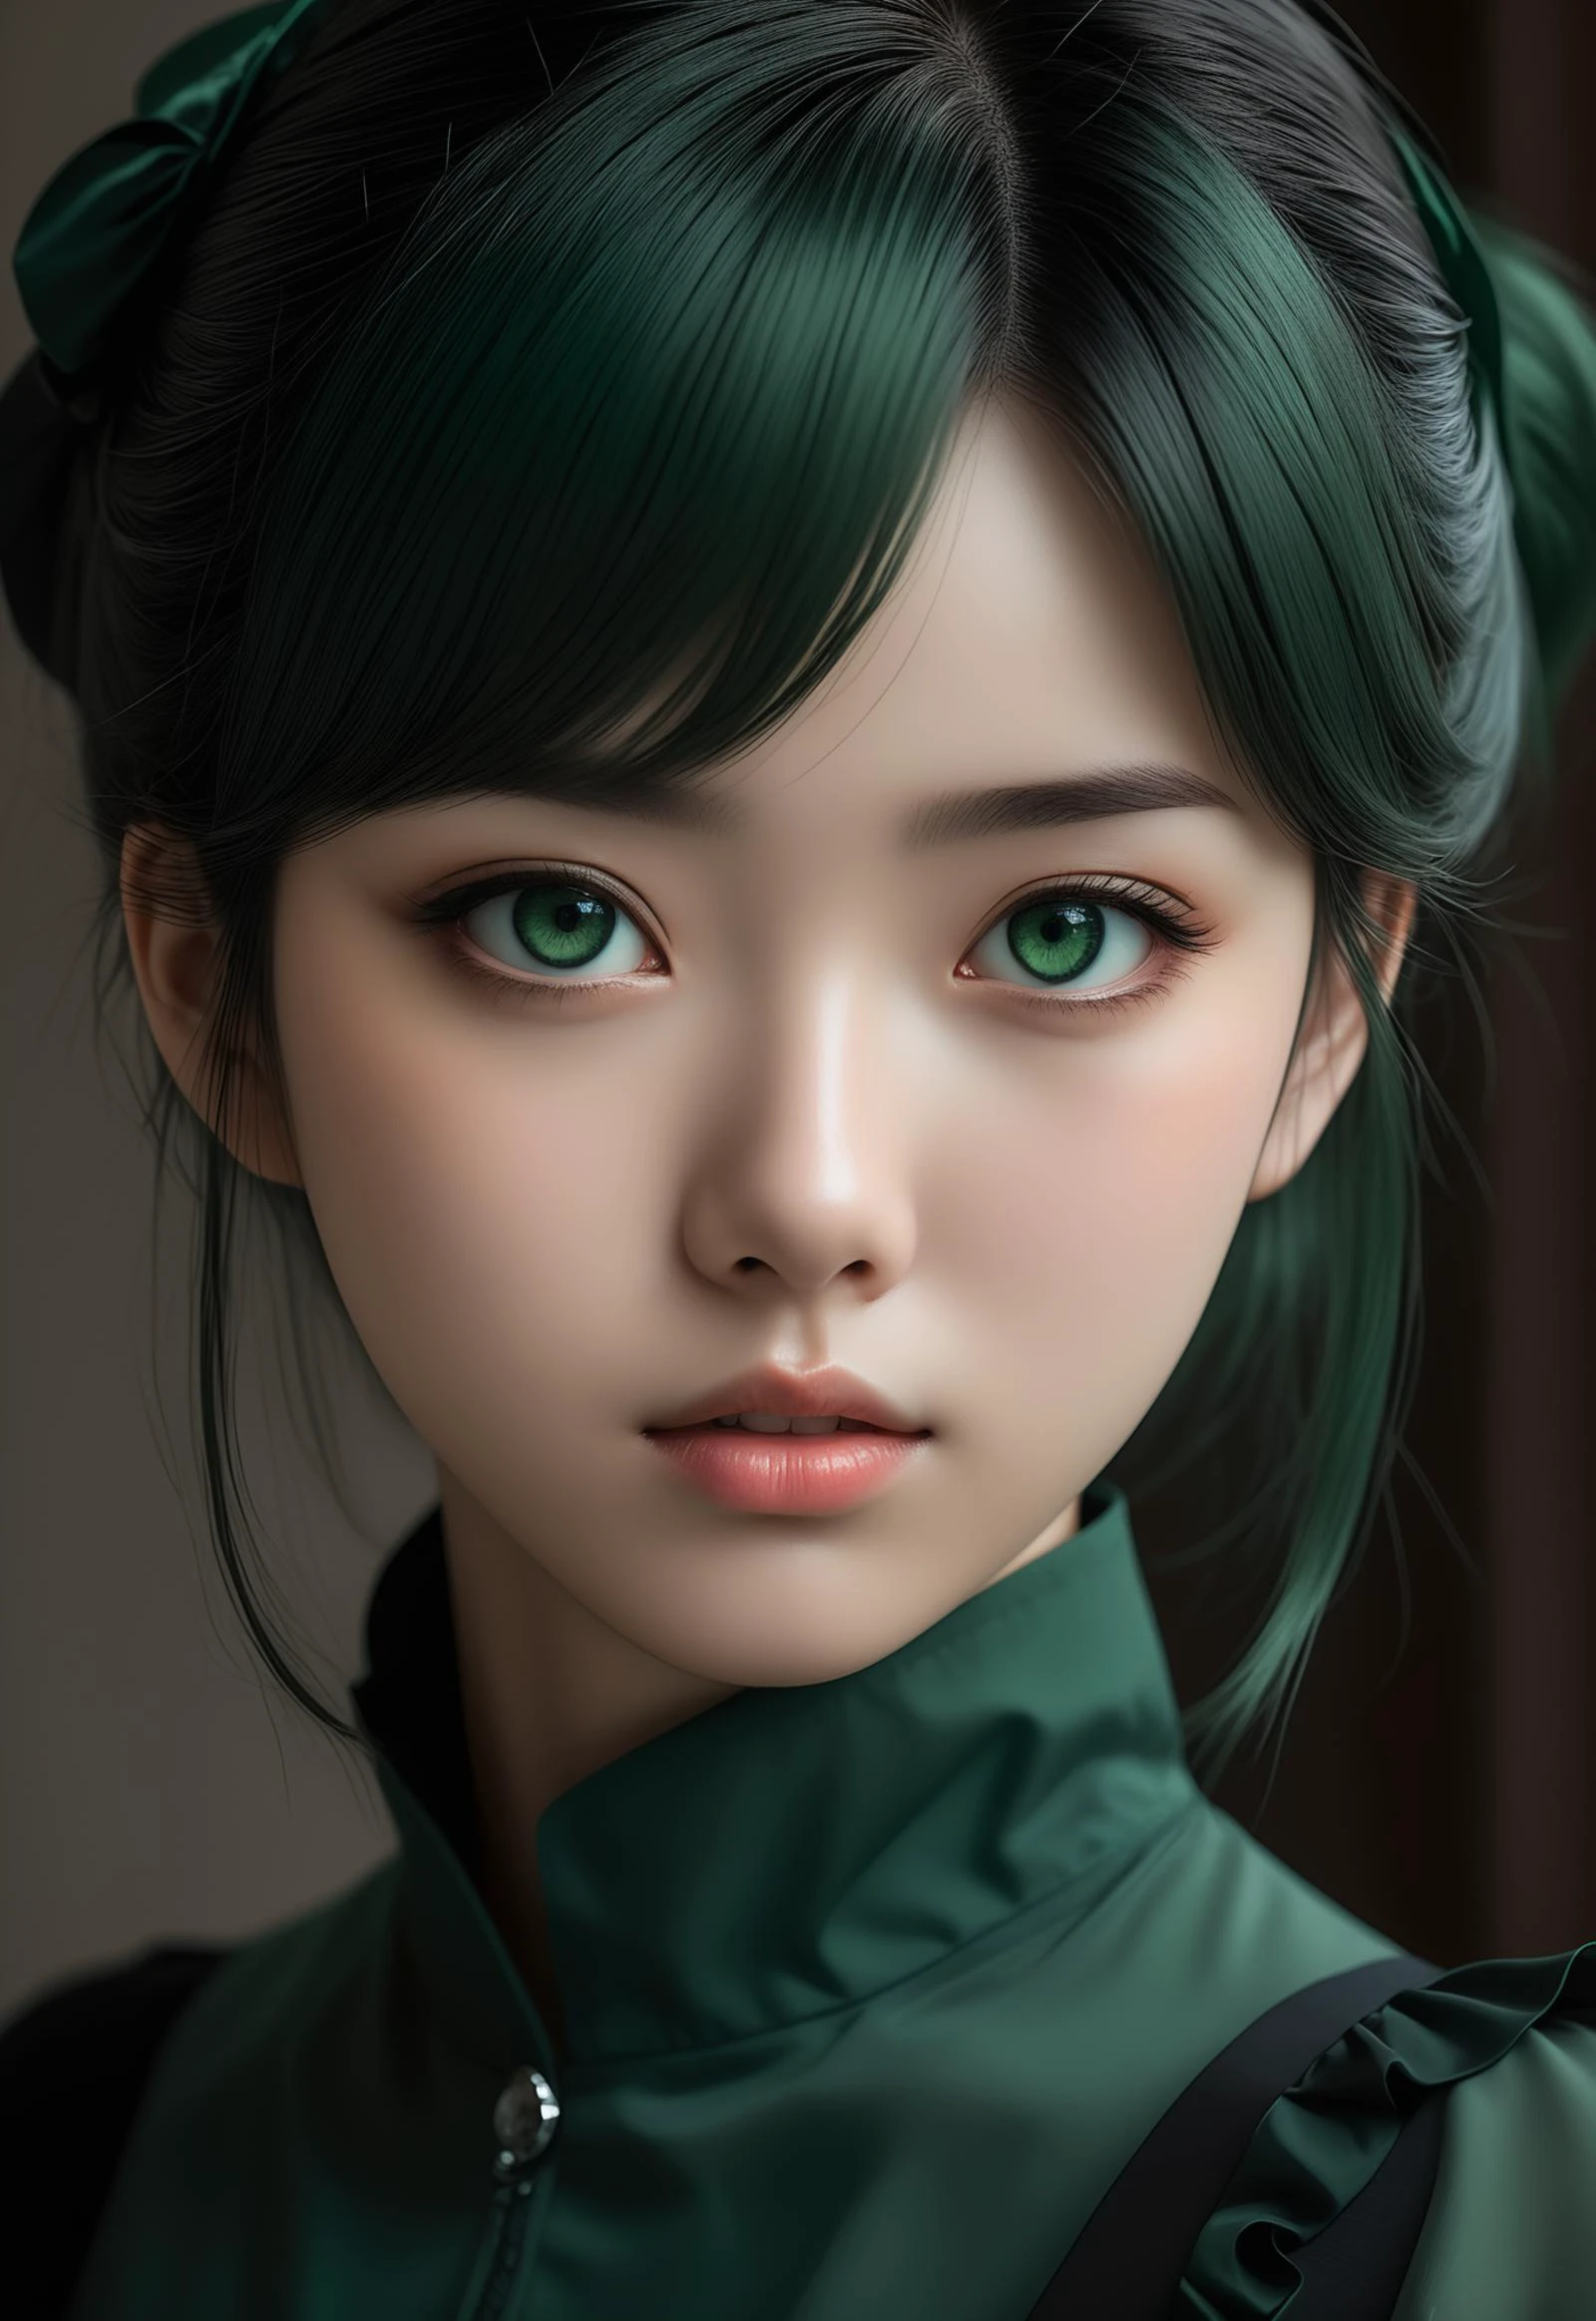 Female anime manga characters, in the style of haunting portraiture, dark green and light black, uncanny valley realism, gongbi, barbizon school, shiny eyes, multilayered realism